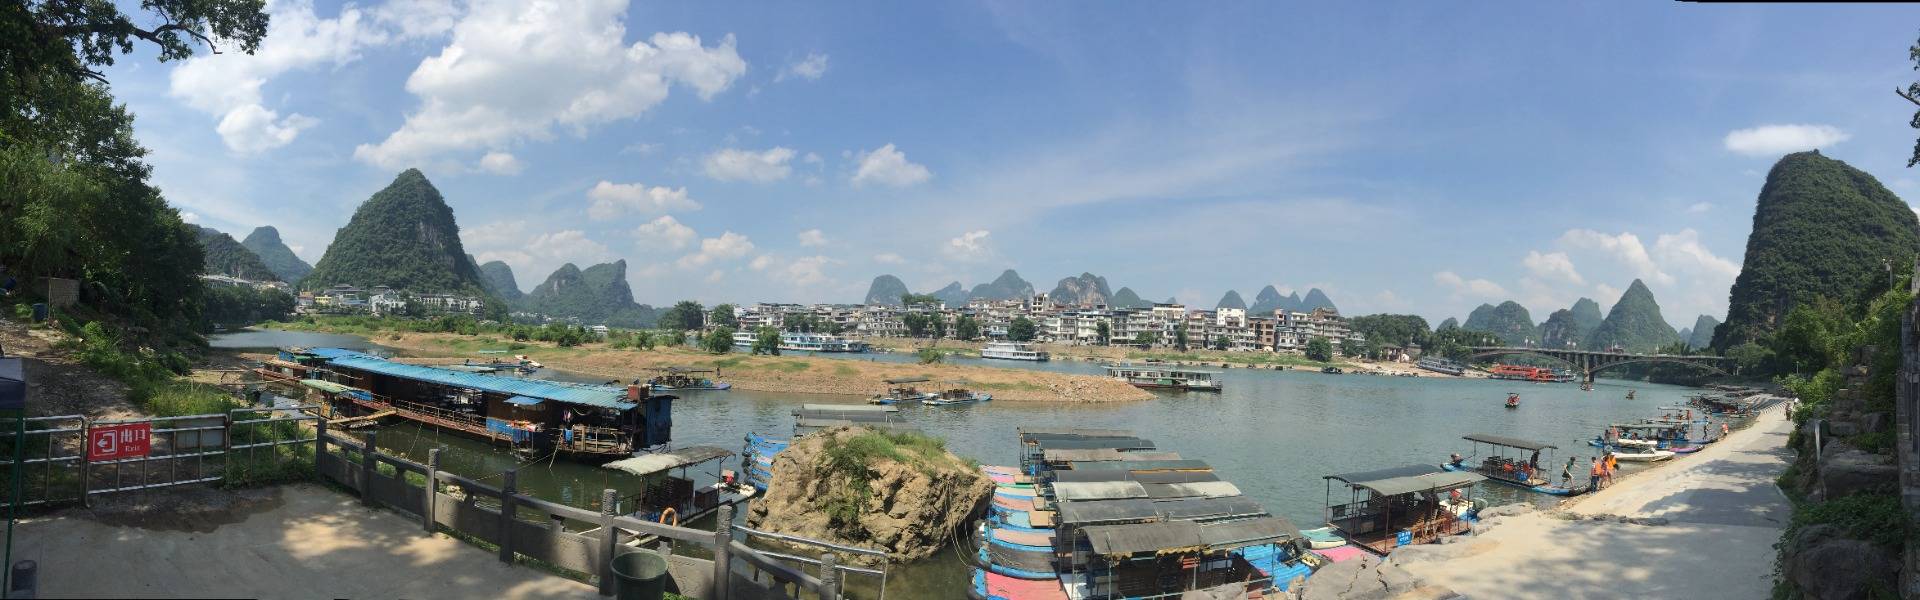 Guilin. Part 12. Yangshuo, a walk along the river on a raft.